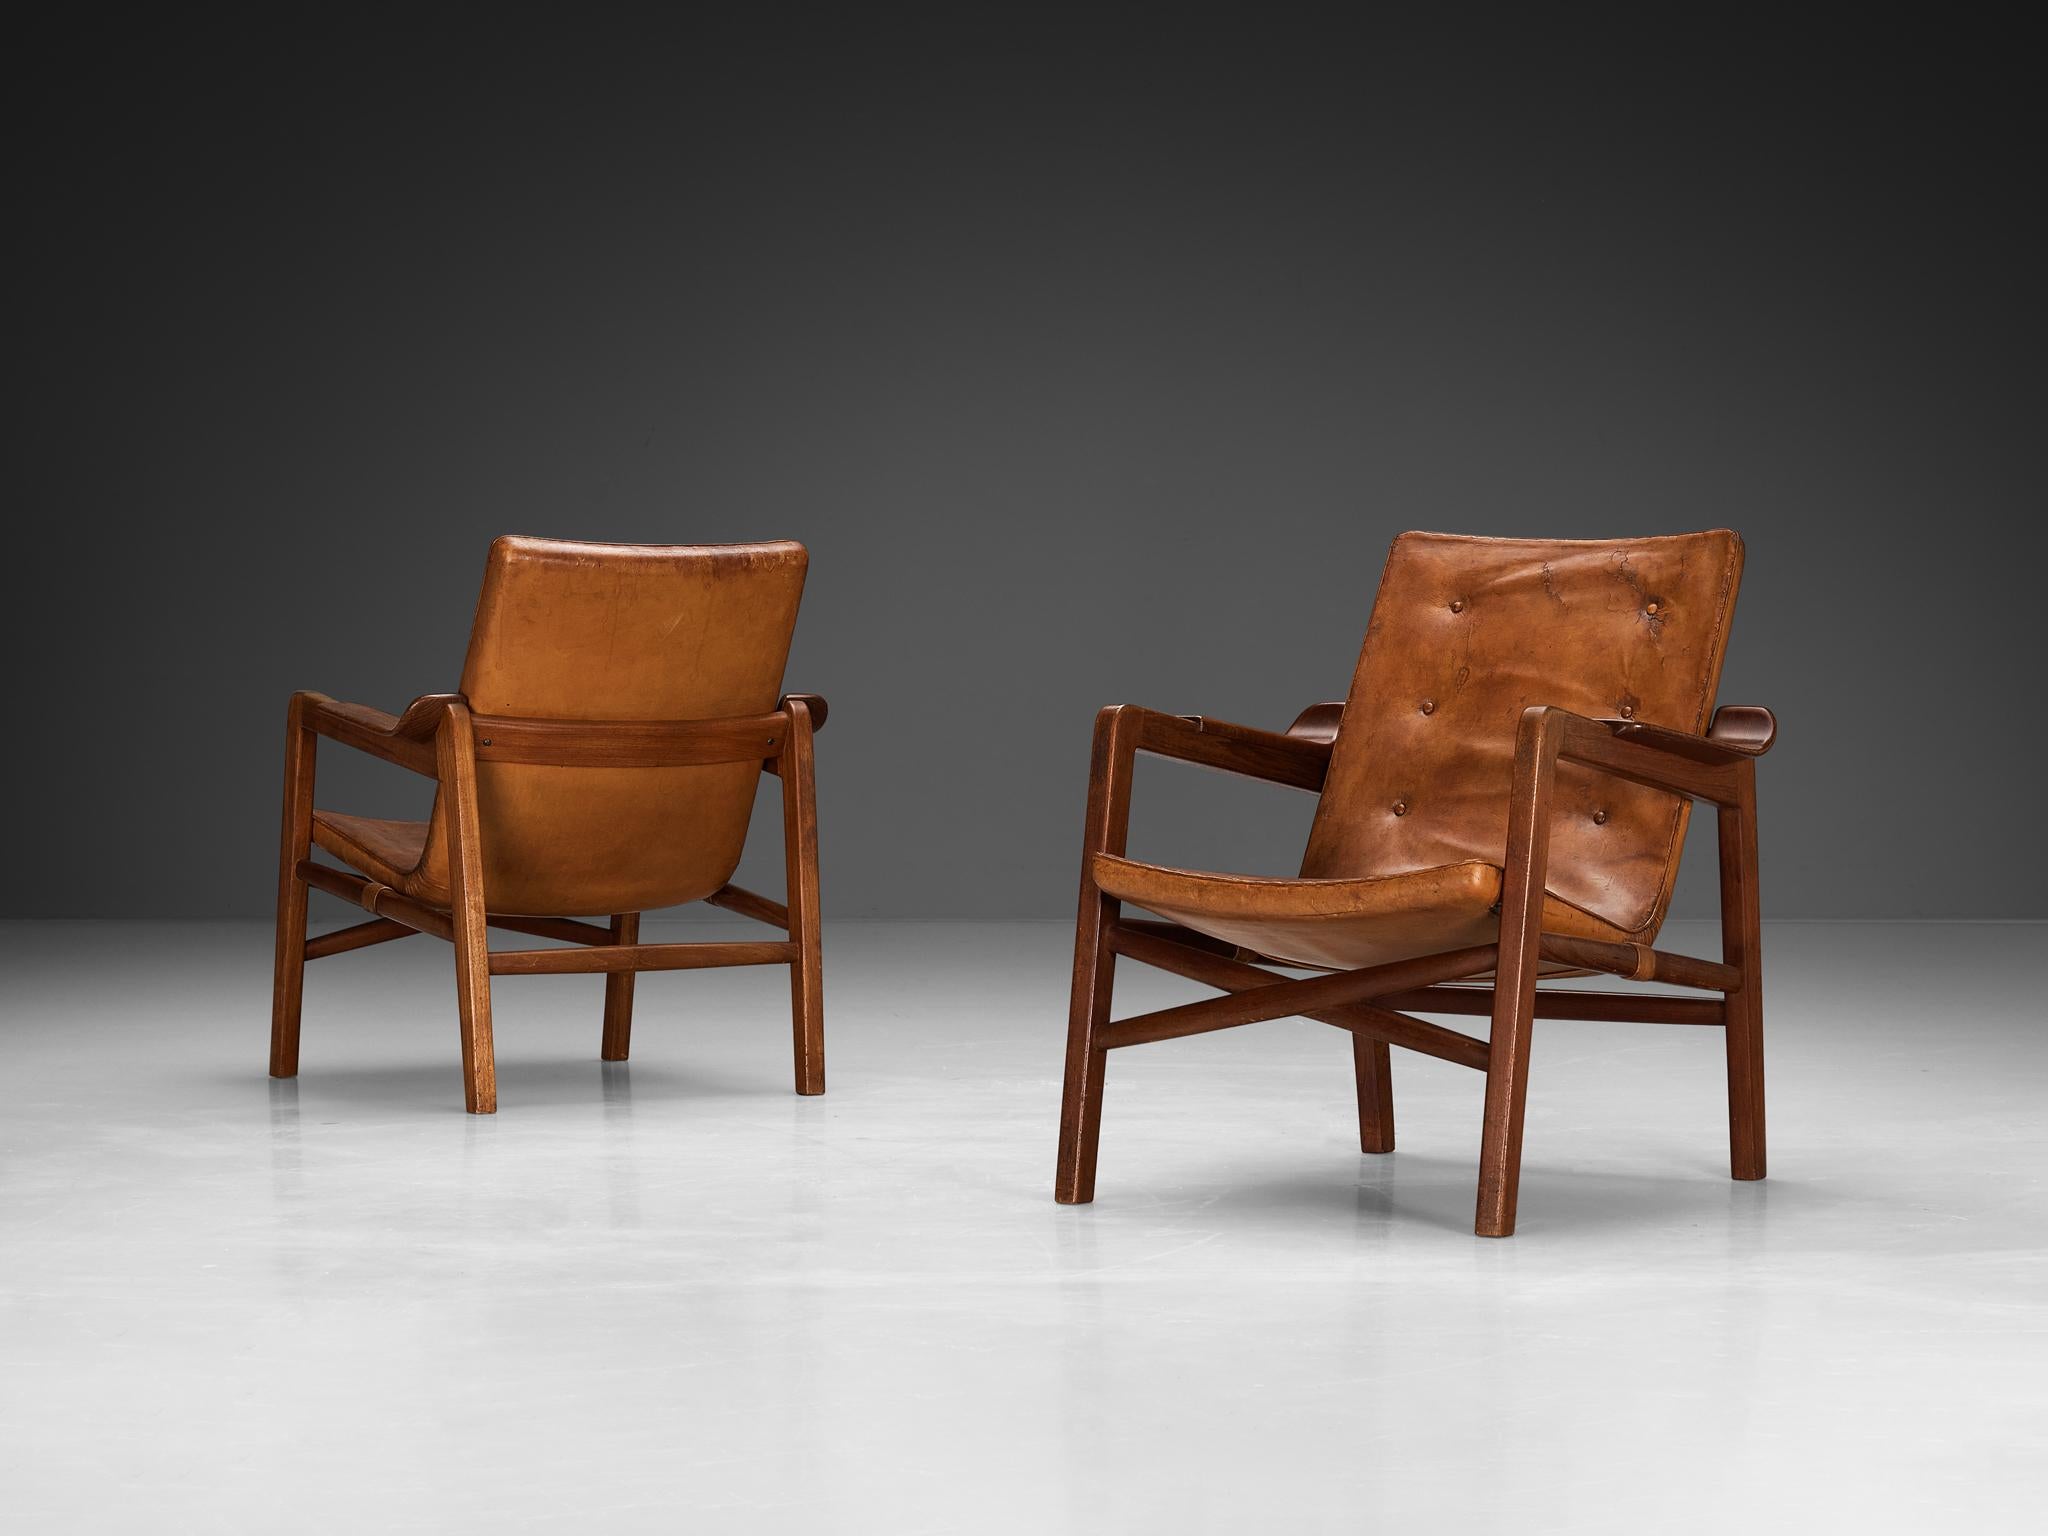 Tove & Edvard Kindt-Larsen for Gustav Bertelsen, pair of lounge chairs 'Fireplace', teak, leather, Denmark, 1940 

These Danish lounge chairs were meticulously crafted for the purpose of accompanying a fireplace, evoking a sense of warmth and